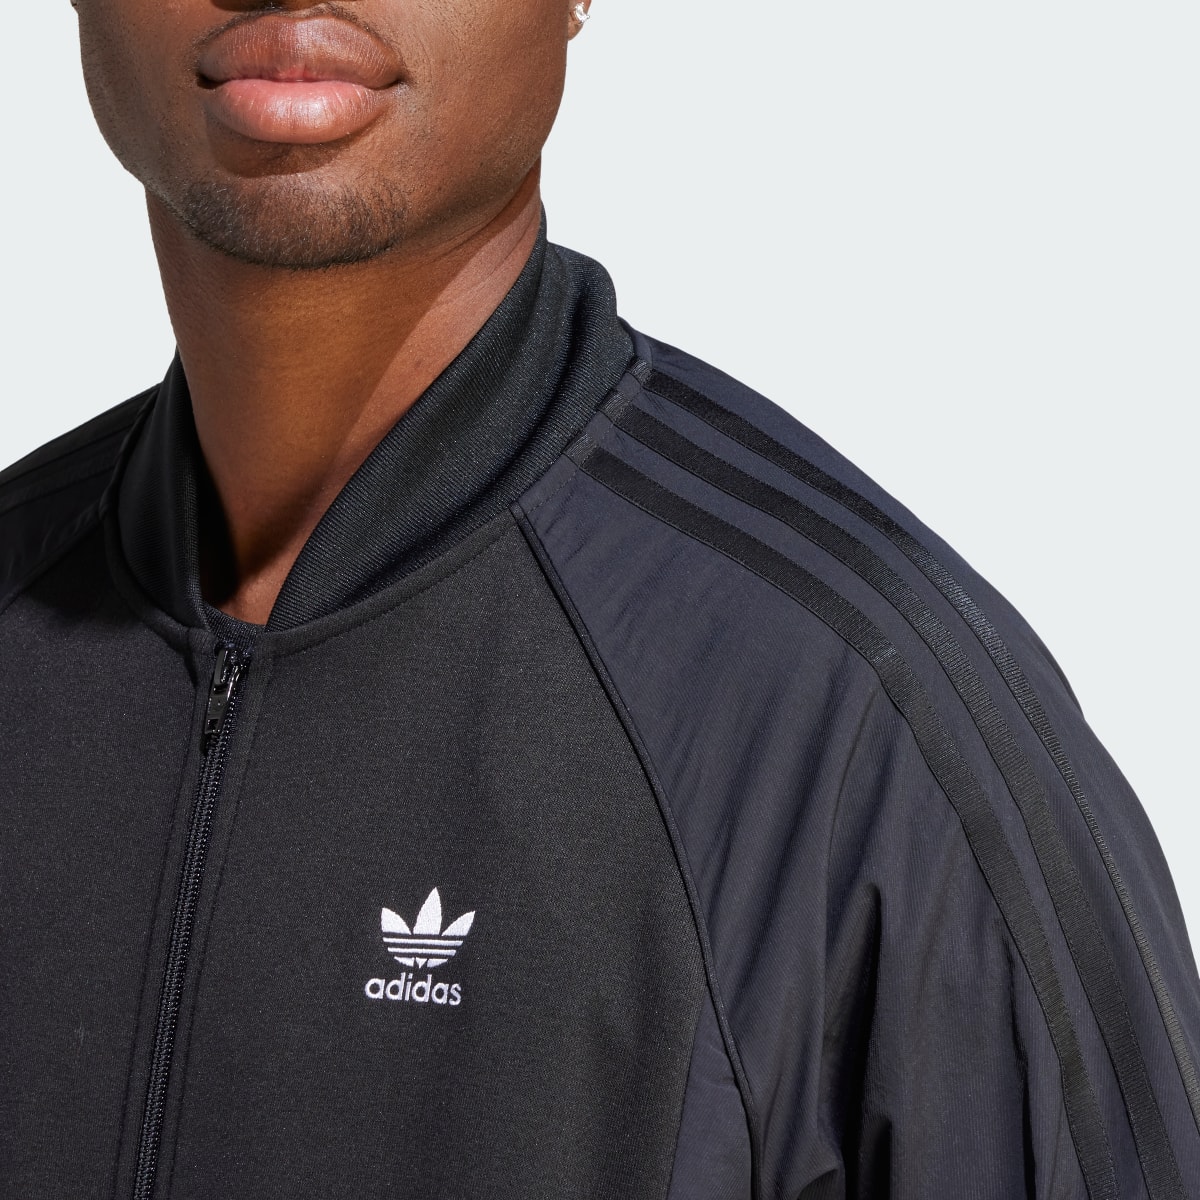 Adidas Adicolor Re-Pro SST Material Mix Track Jacket. 6